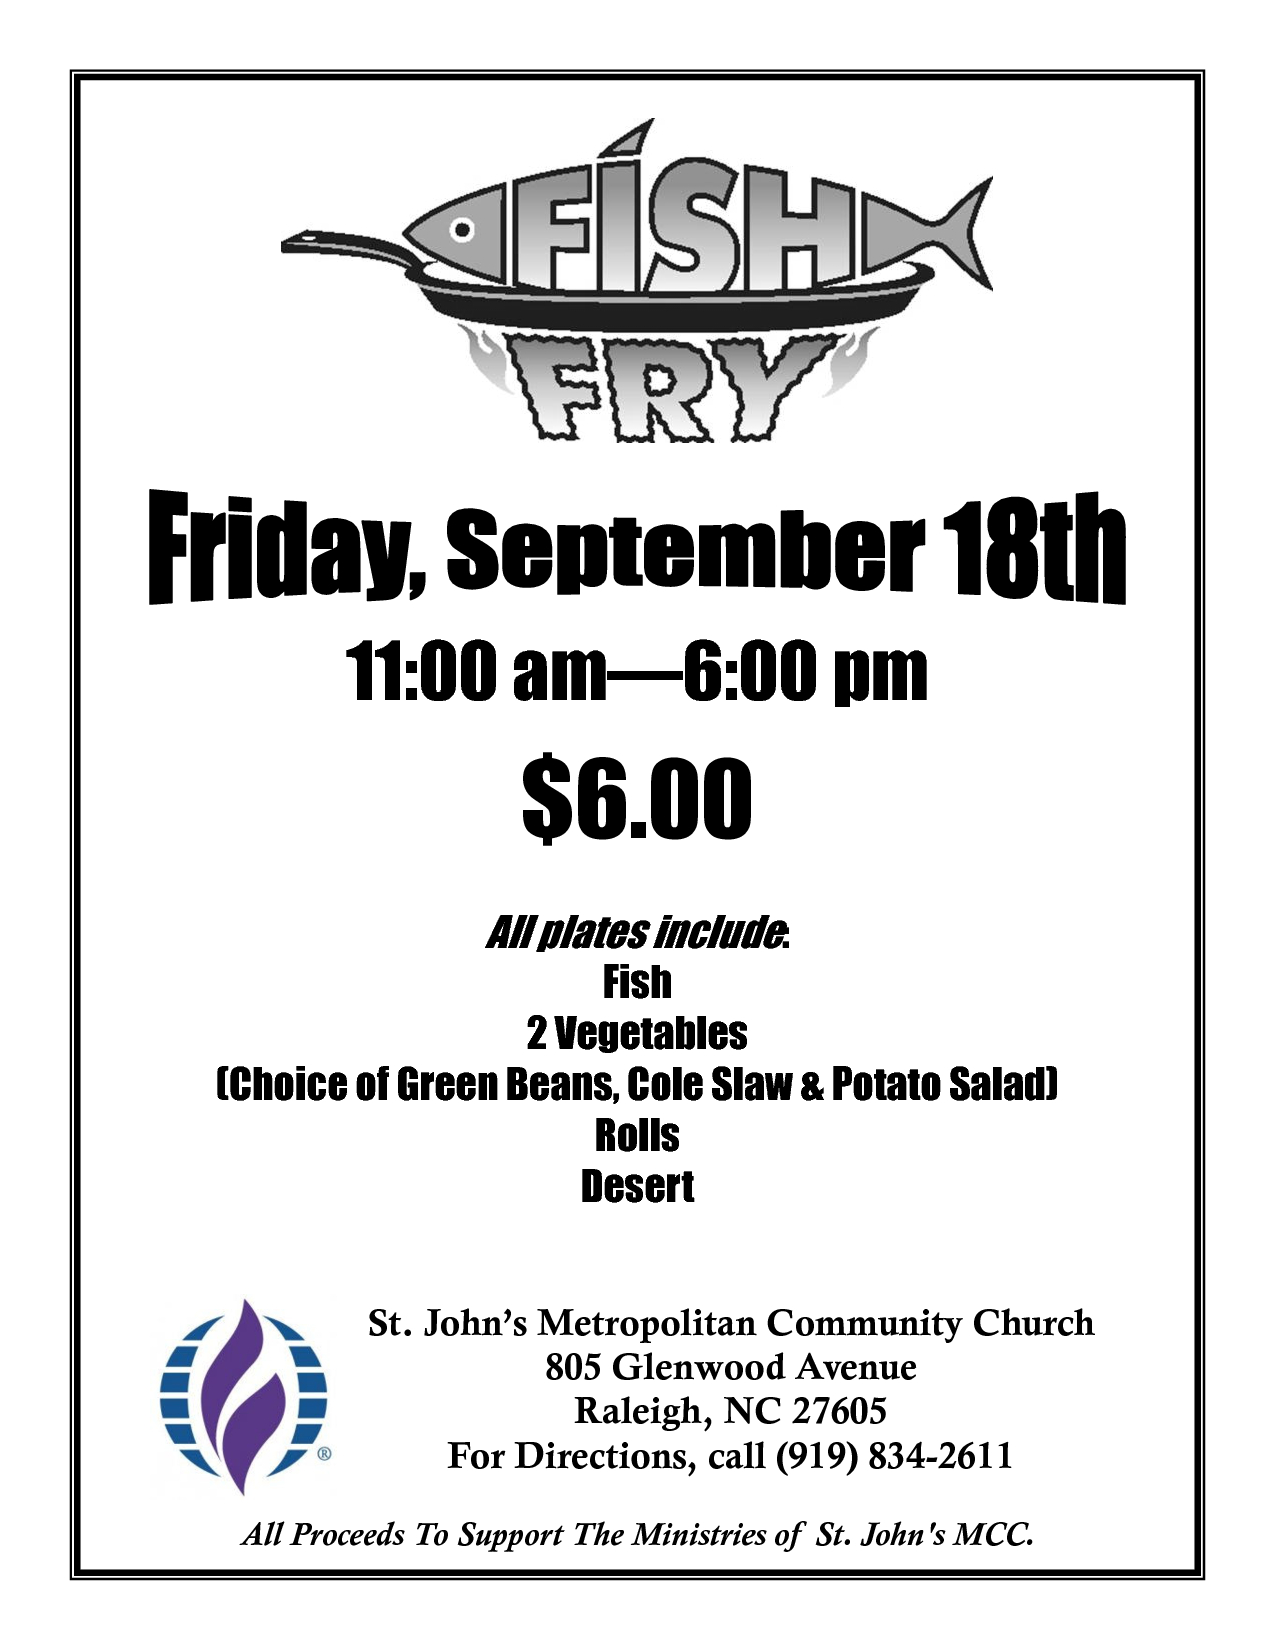 Free Fish-Fry Flyer Templates | Fish Fry Poster | Fish Fry | Fried - Free Printable Fundraiser Flyer Templates